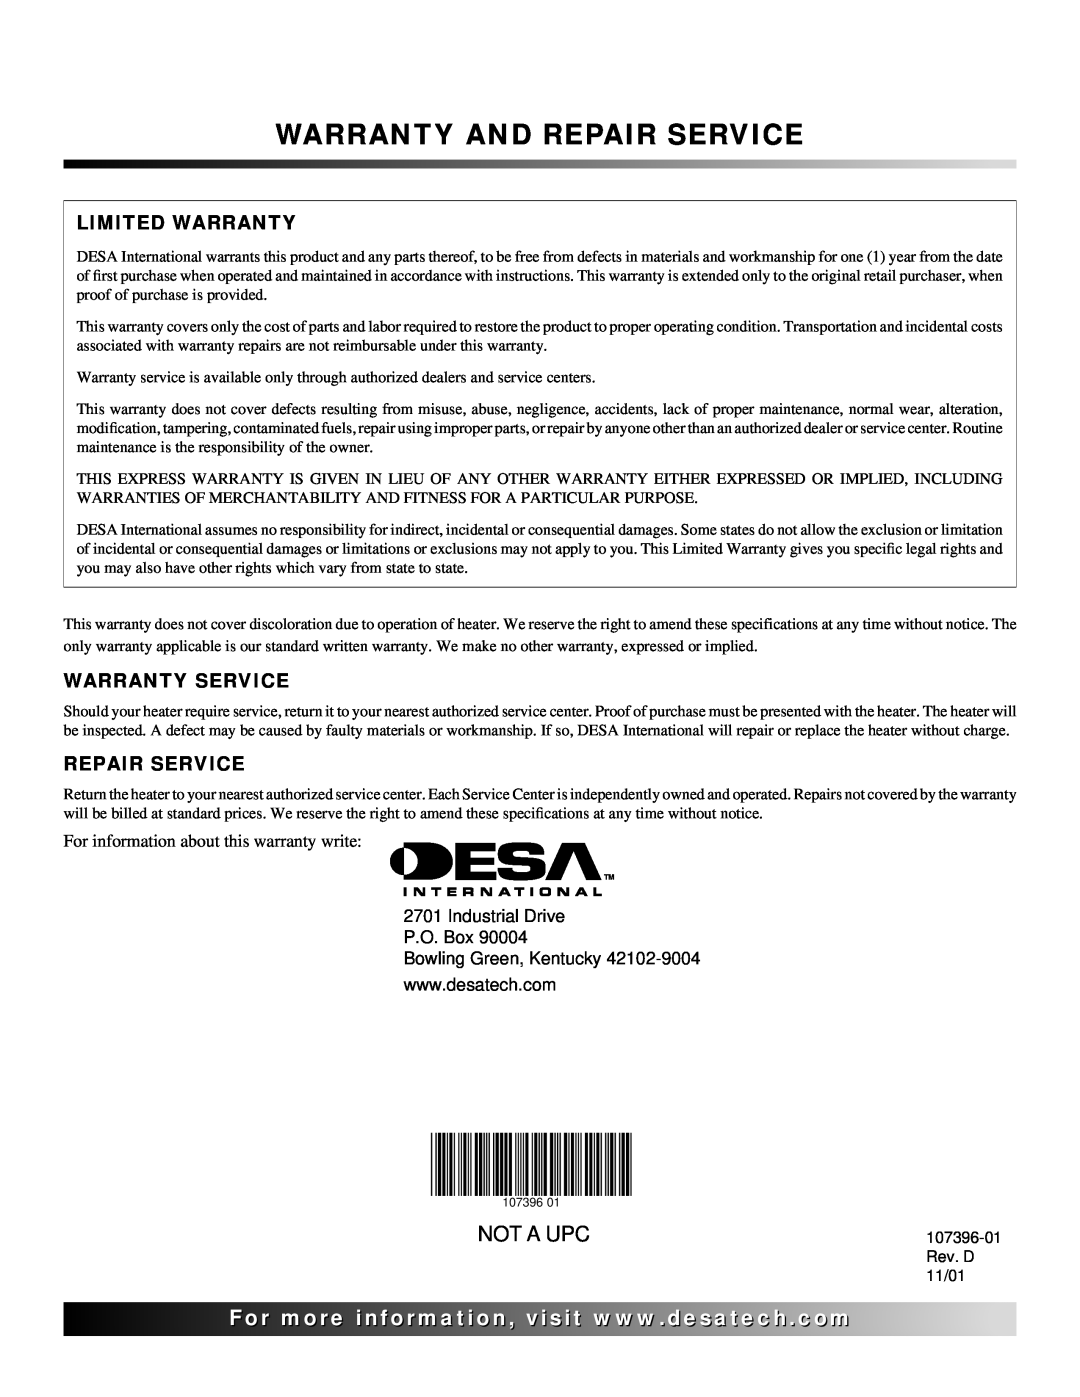 Desa 28BN installation manual Warranty And Repair Service, Not A Upc, For..com, Limited Warranty, Warranty Service 